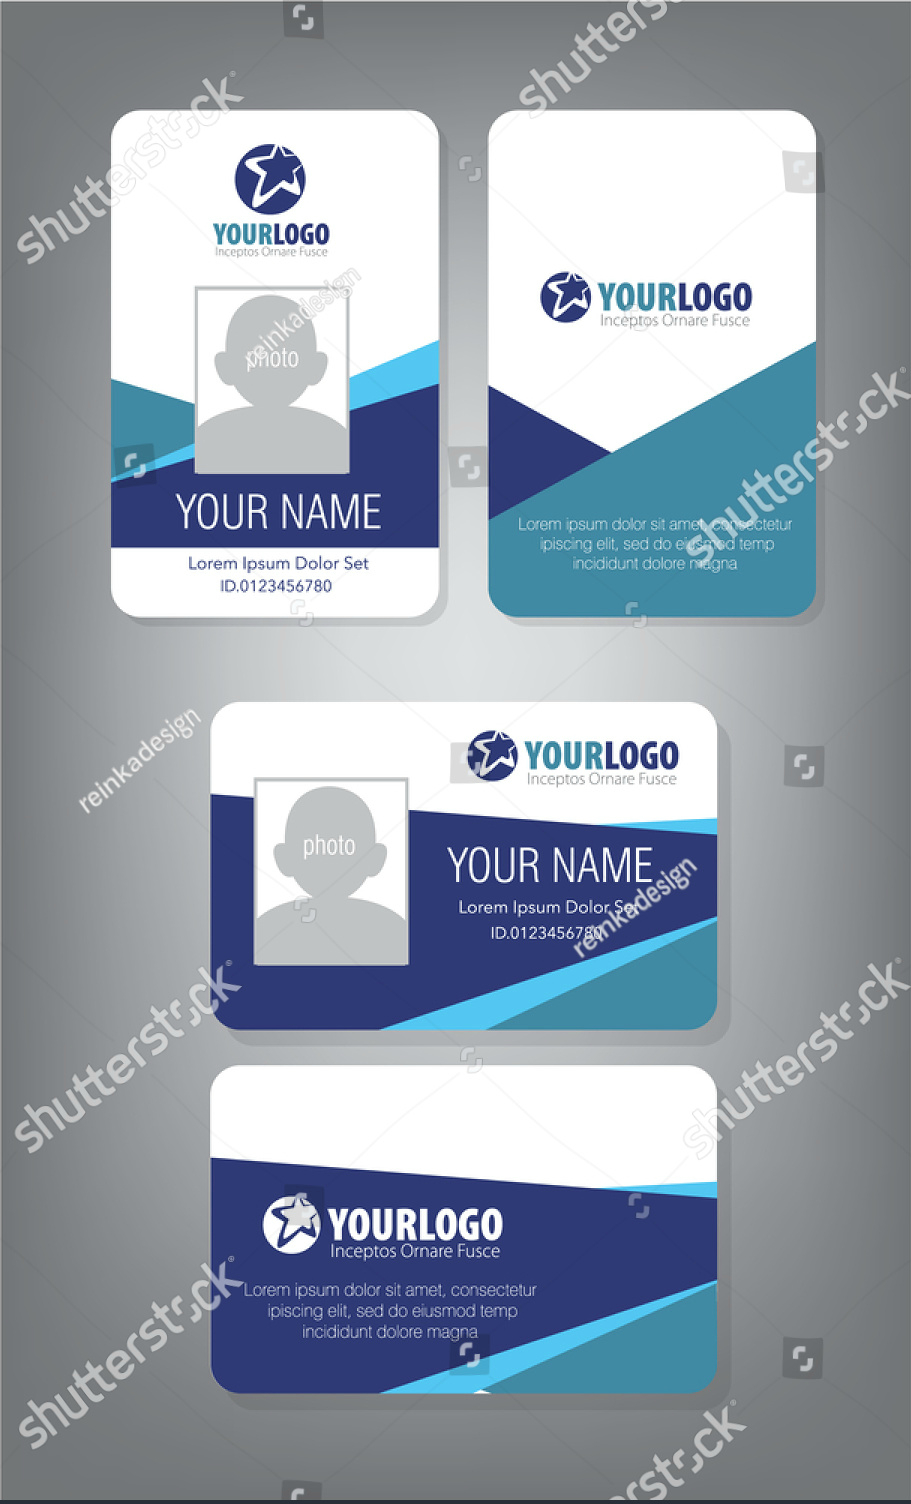 43+ Professional Id Card Designs – Psd, Eps, Ai, Word | Free In Id Card Design Template Psd Free Download